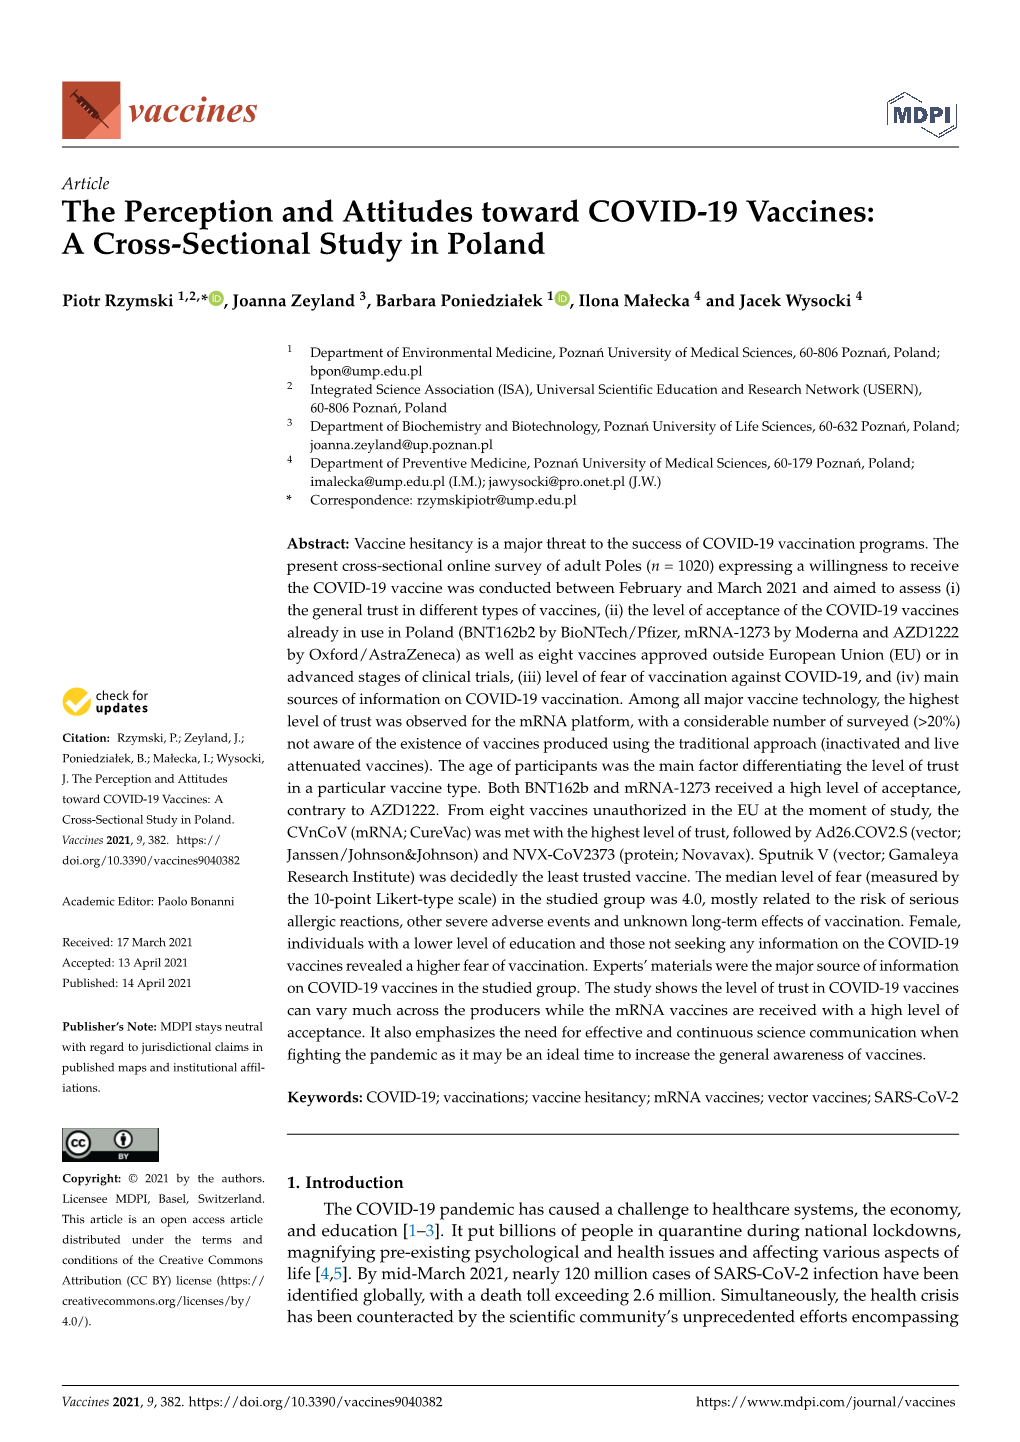 The Perception and Attitudes Toward COVID-19 Vaccines: a Cross-Sectional Study in Poland